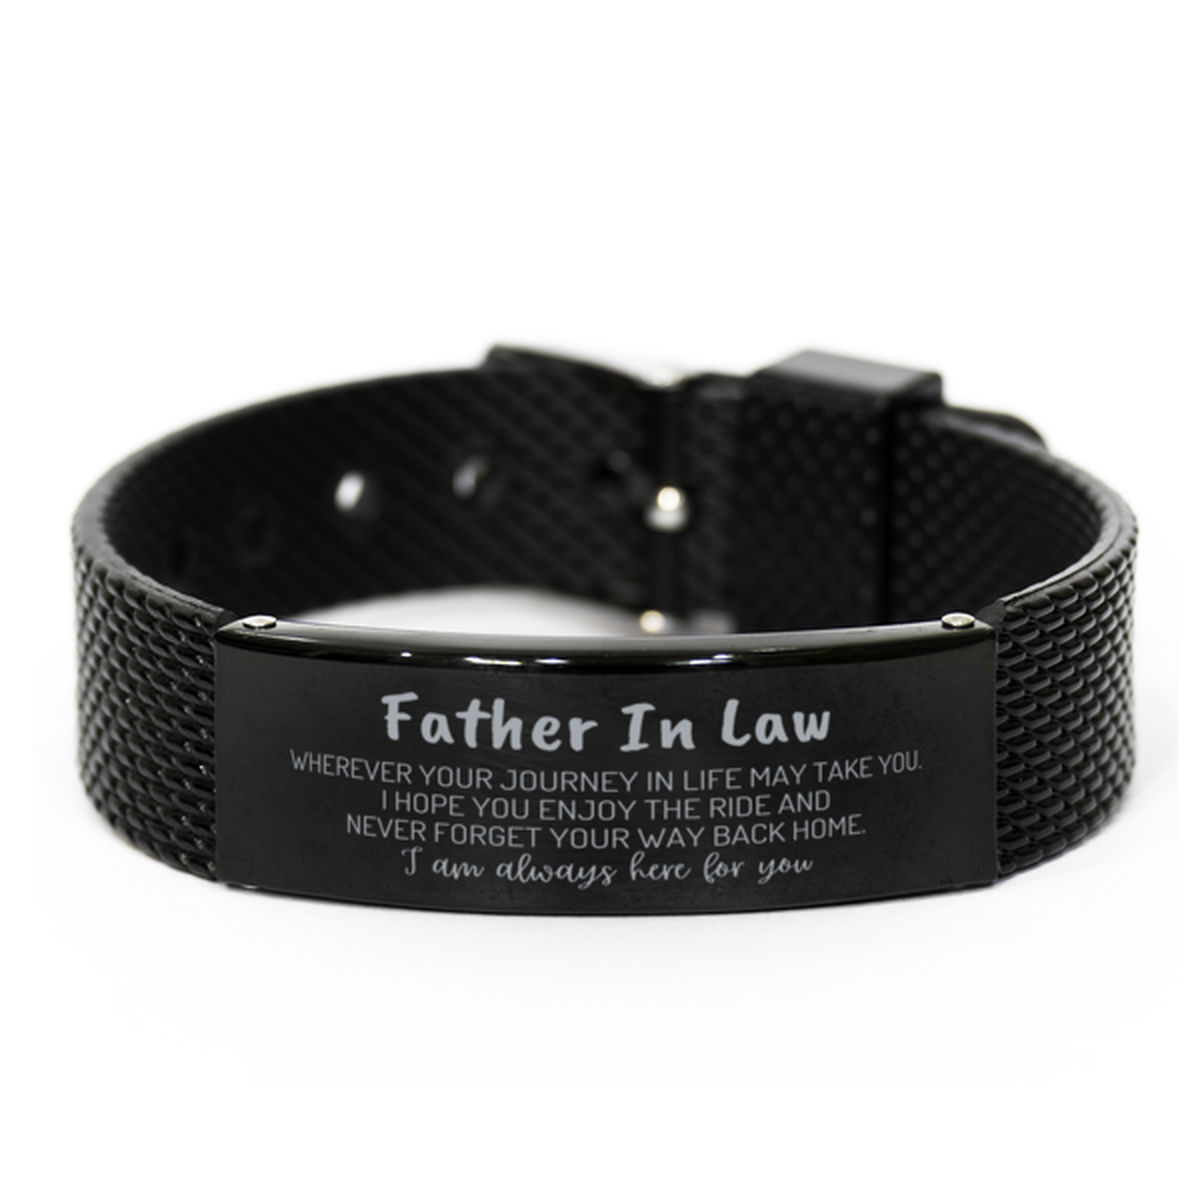 Father In Law wherever your journey in life may take you, I am always here for you Father In Law Black Shark Mesh Bracelet, Awesome Christmas Gifts For Father In Law, Father In Law Birthday Gifts for Men Women Family Loved One